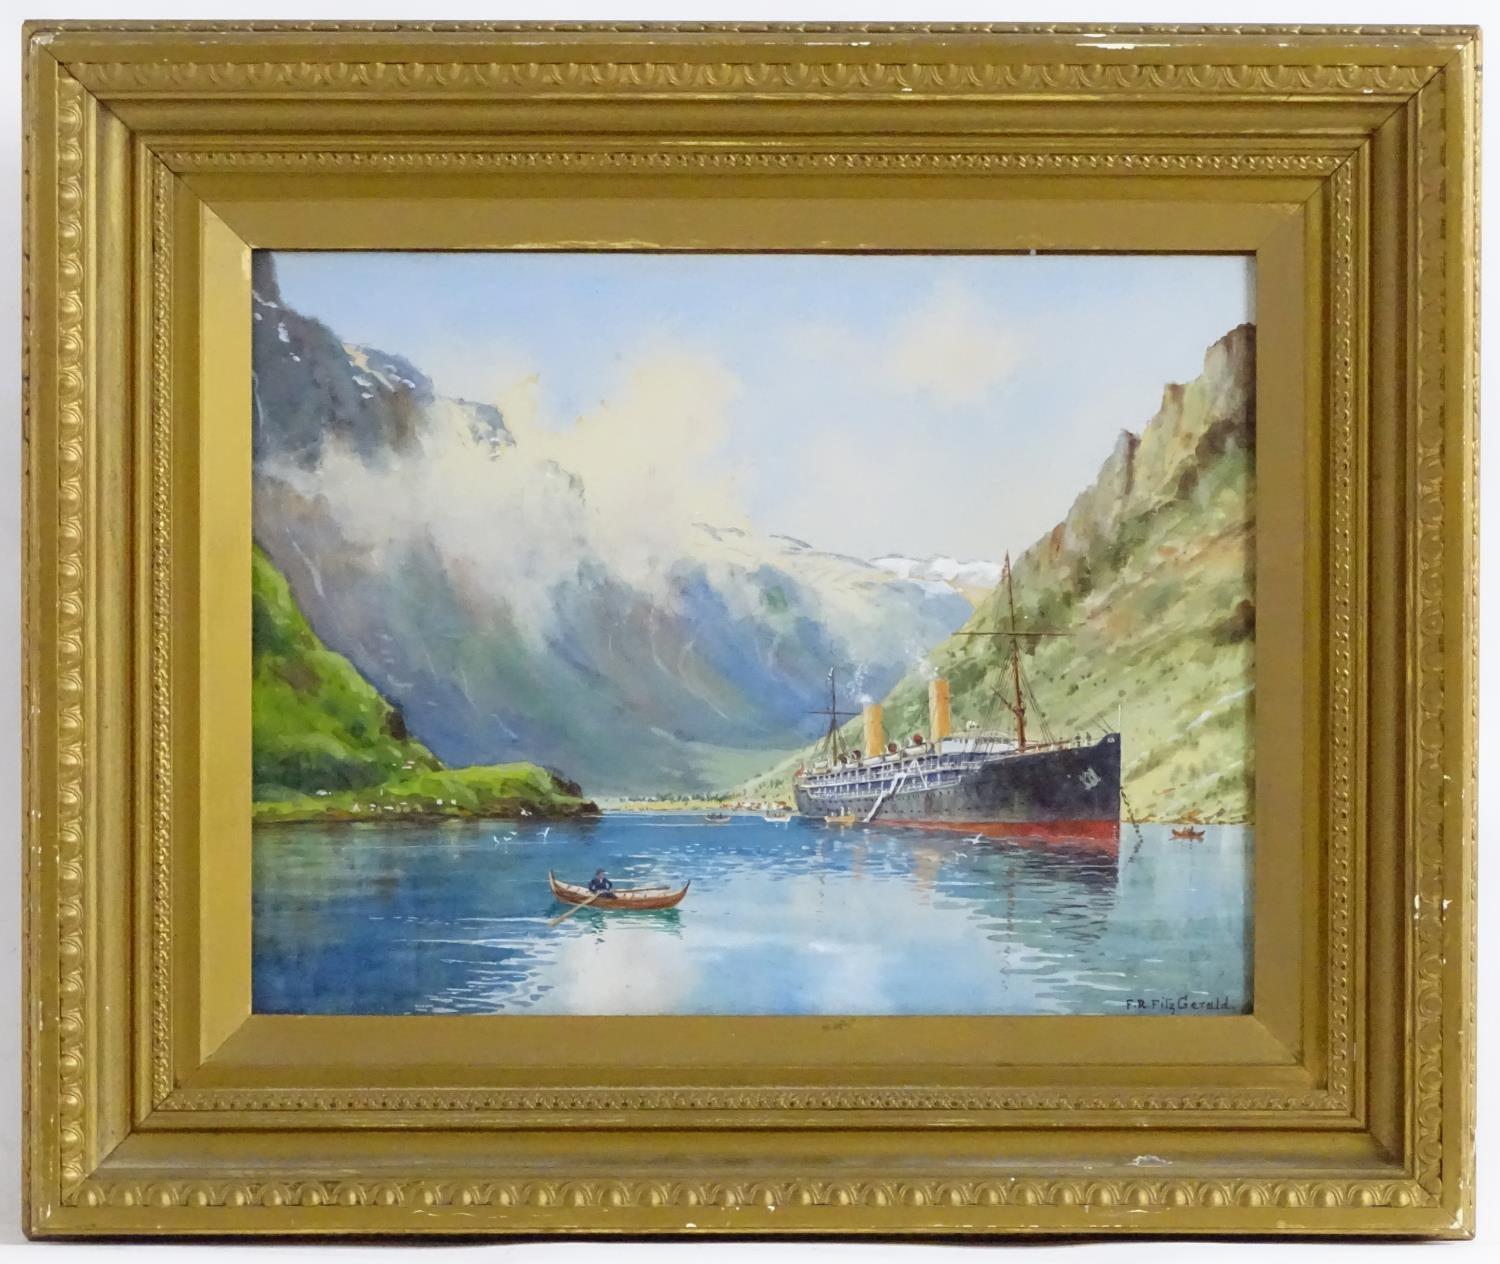 Frederick R. Fitzgerald (1869-1944), Watercolour, An ocean liner in a Fjord with rowing boats and